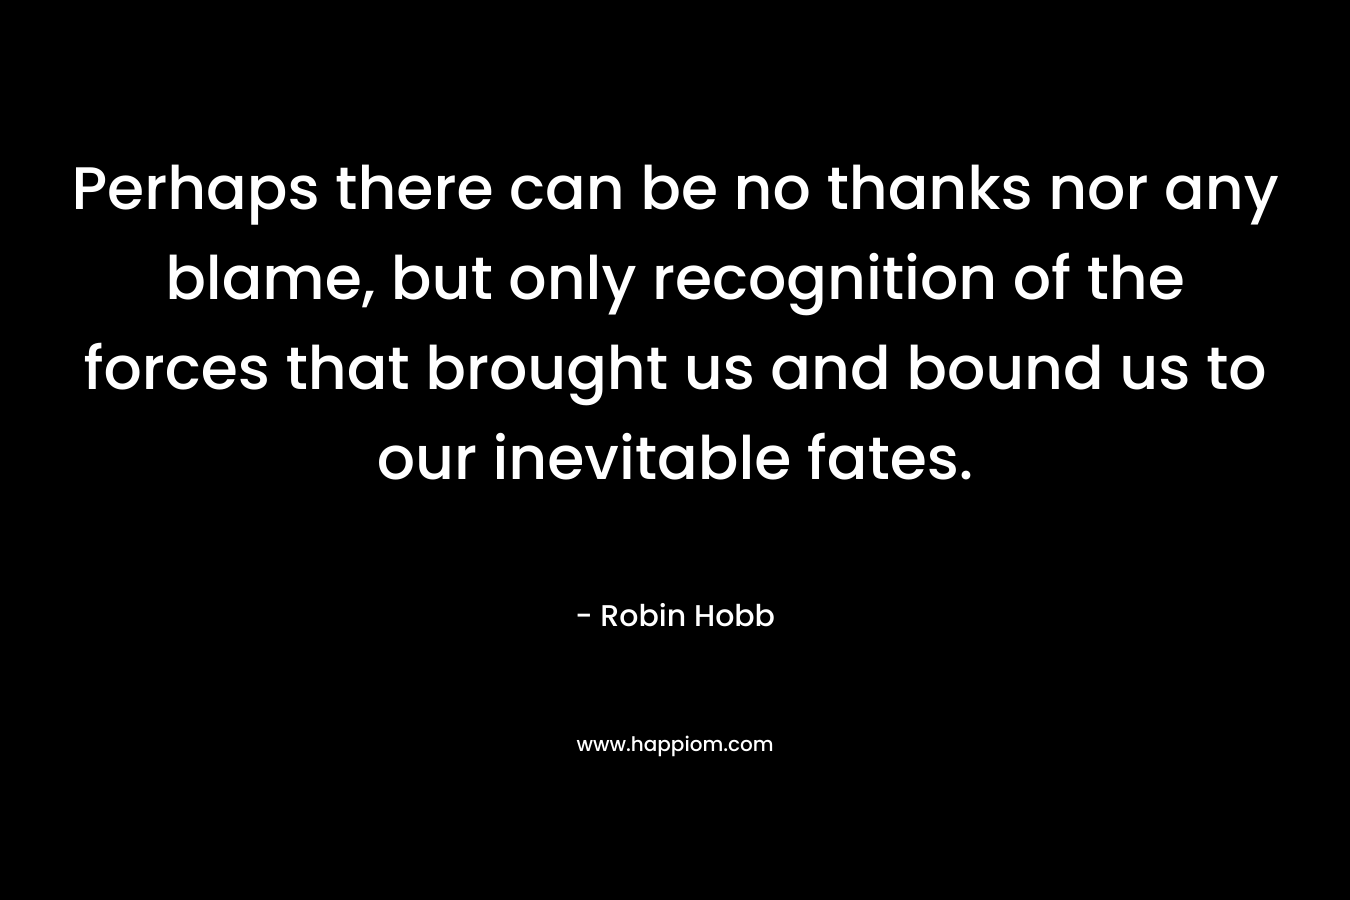 Perhaps there can be no thanks nor any blame, but only recognition of the forces that brought us and bound us to our inevitable fates. – Robin Hobb